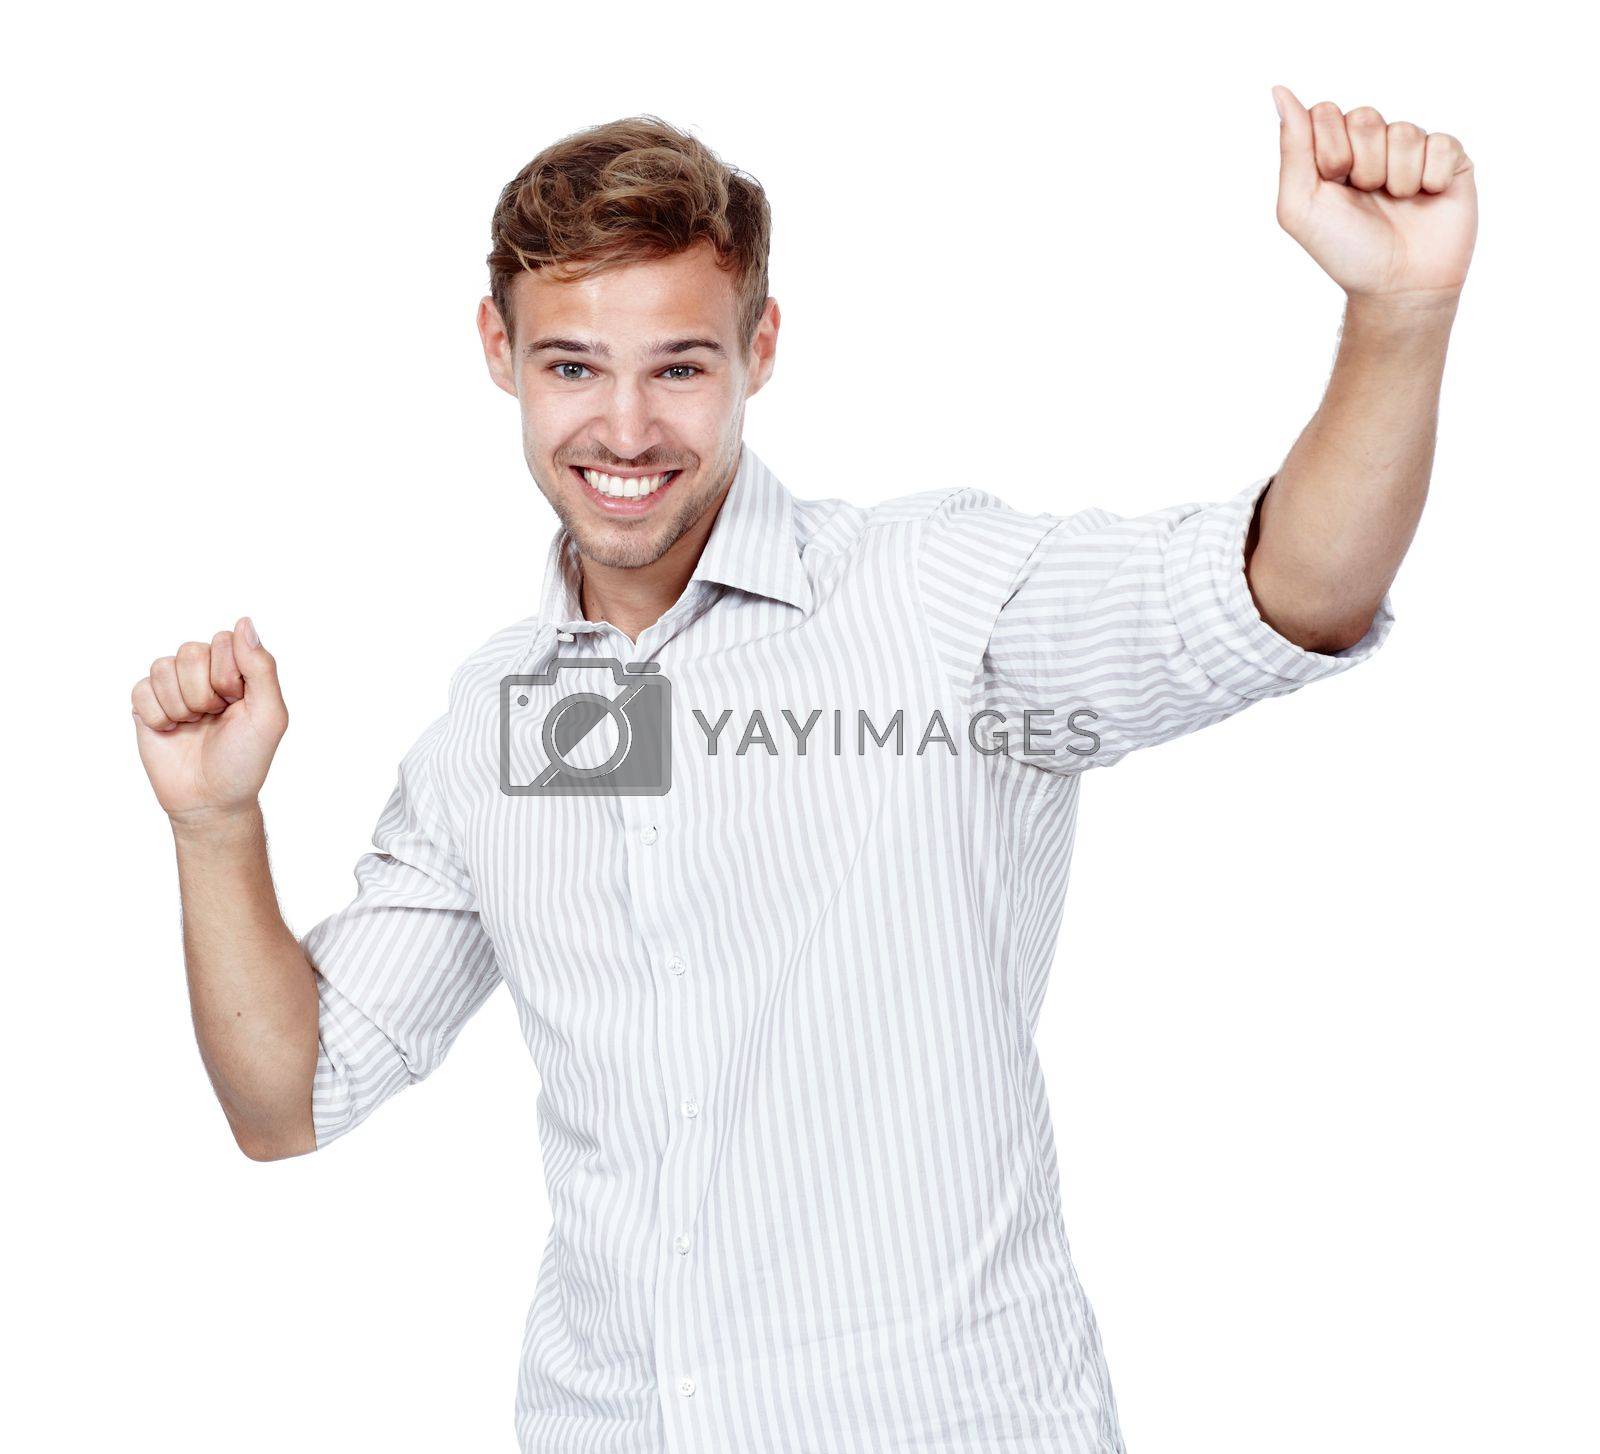 Royalty free image of Yay for me. Studio shot of a young man raising his arms in celebration of a success. by YuriArcurs